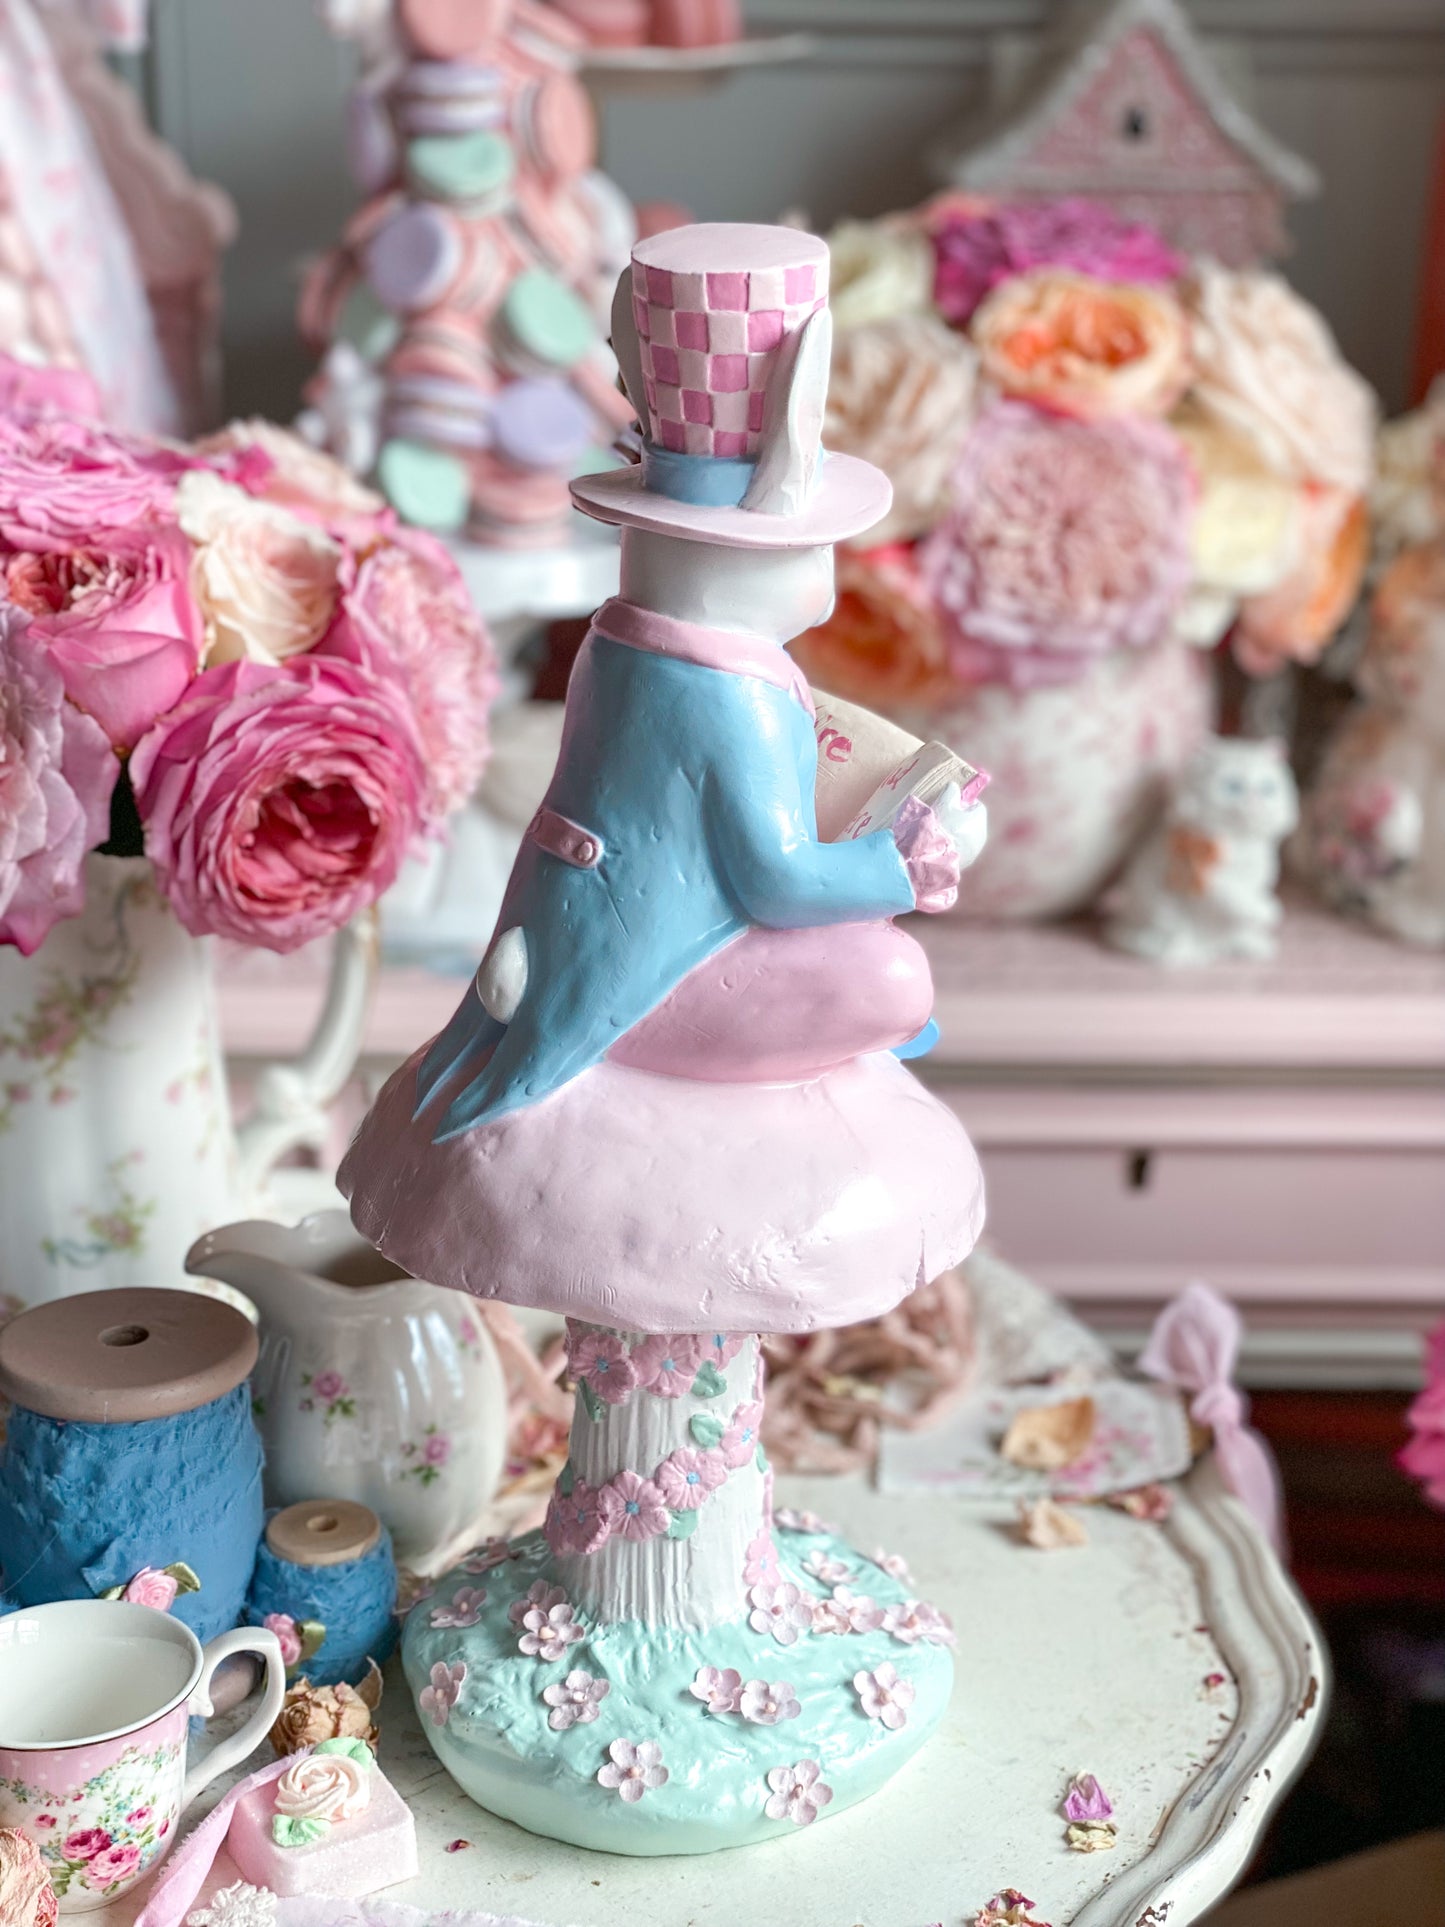 Bespoke Hand Painted Pastel Pink & Blue Mad Hatter Bunny Reading Book of Alice in Wonderland on a Mushroom